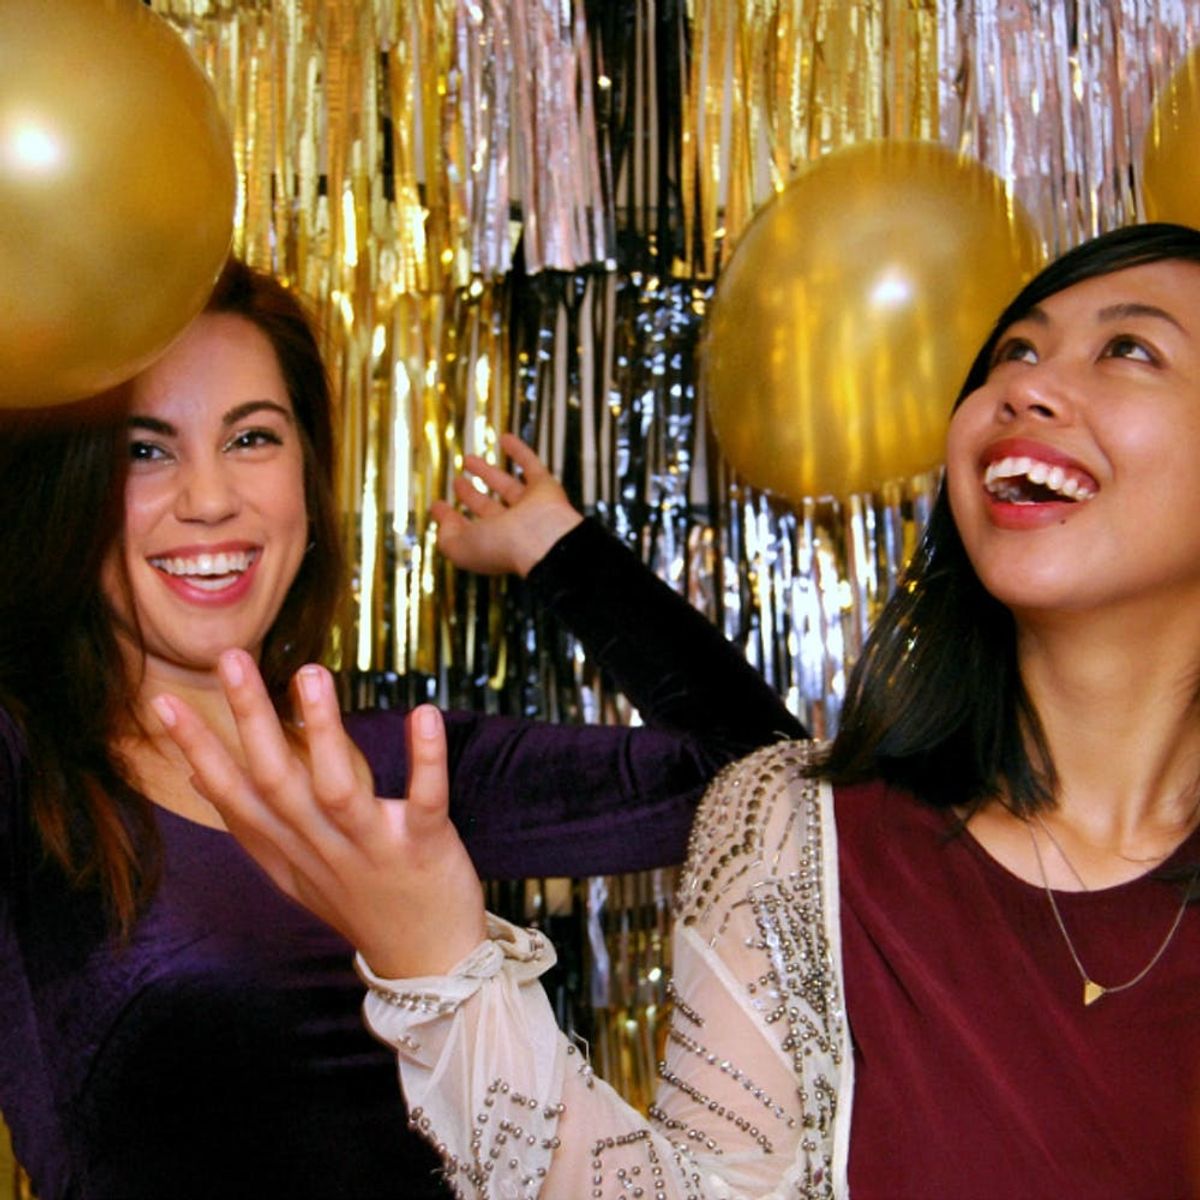 Expert Tricks for New Year’s Eve Photo Booth Pics That Aren’t Lame